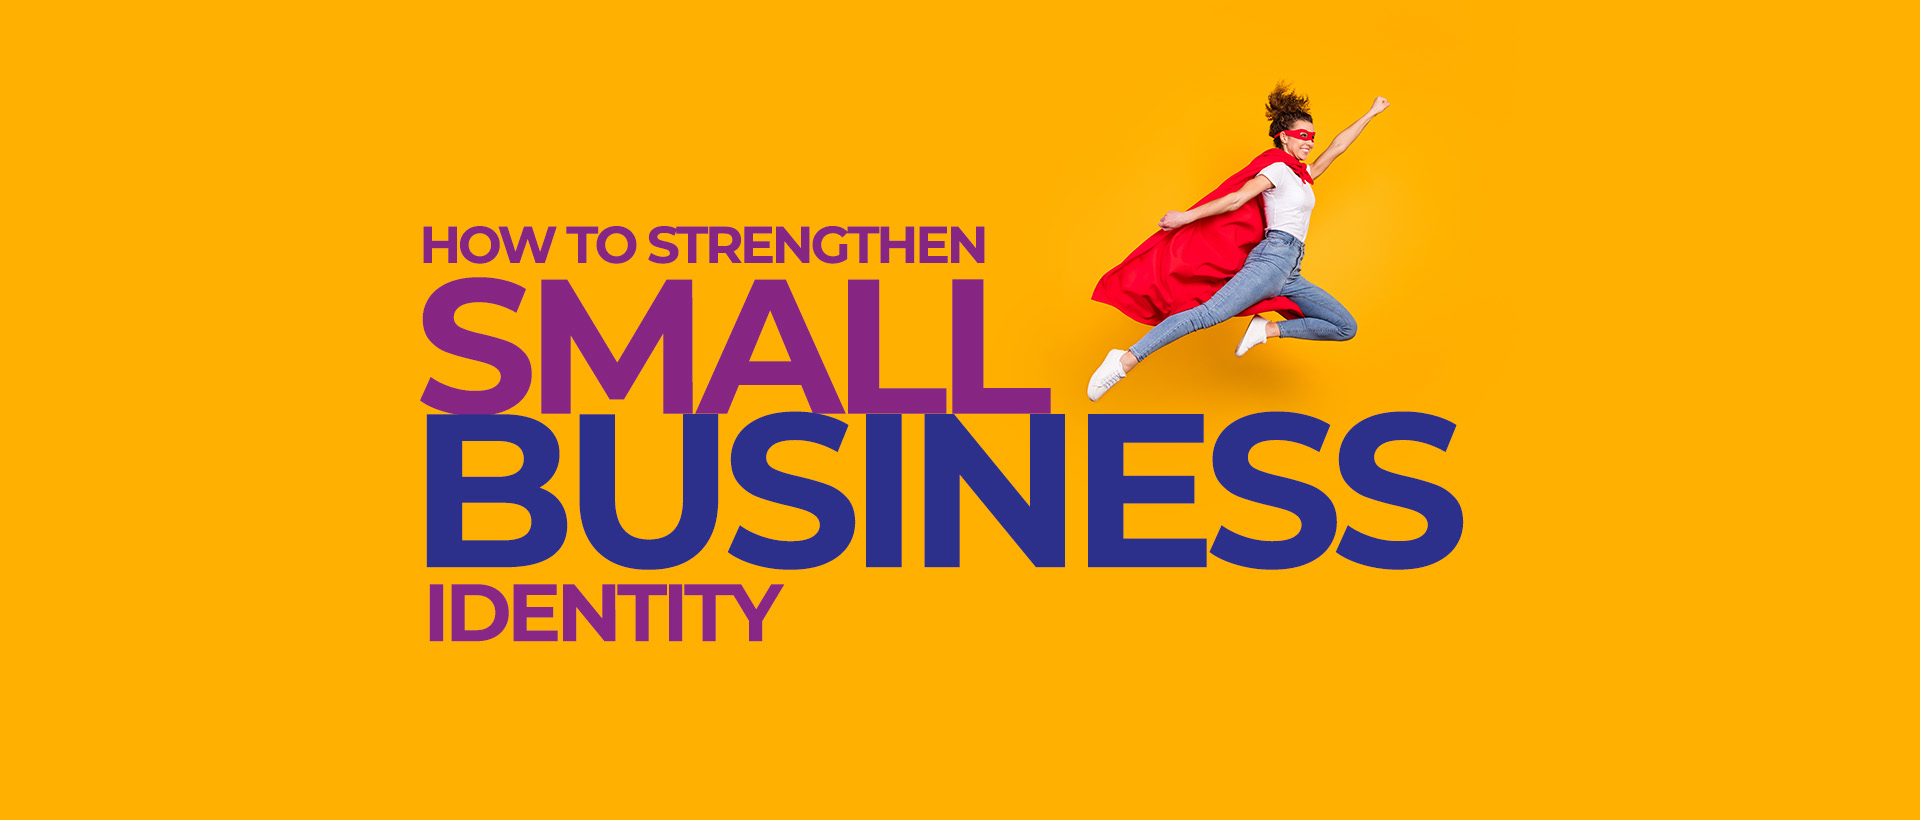 How To Strengthen Small Business Identity